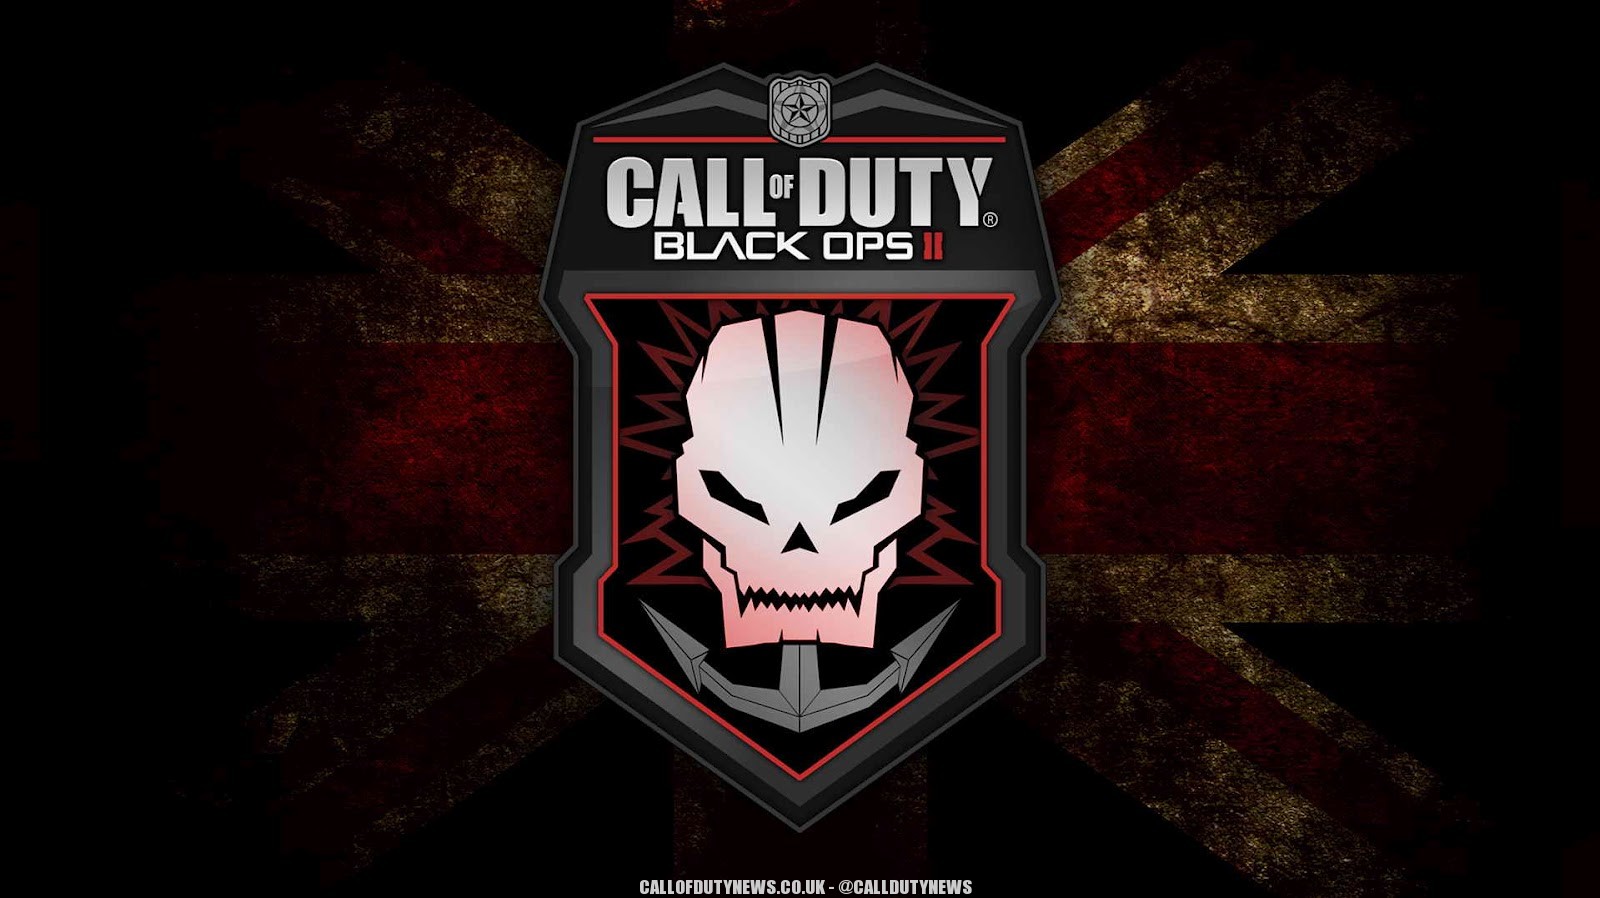 150 Black Ops 2 Wallpapers SINGLE DOWNLOAD LINK Call of Duty Blog